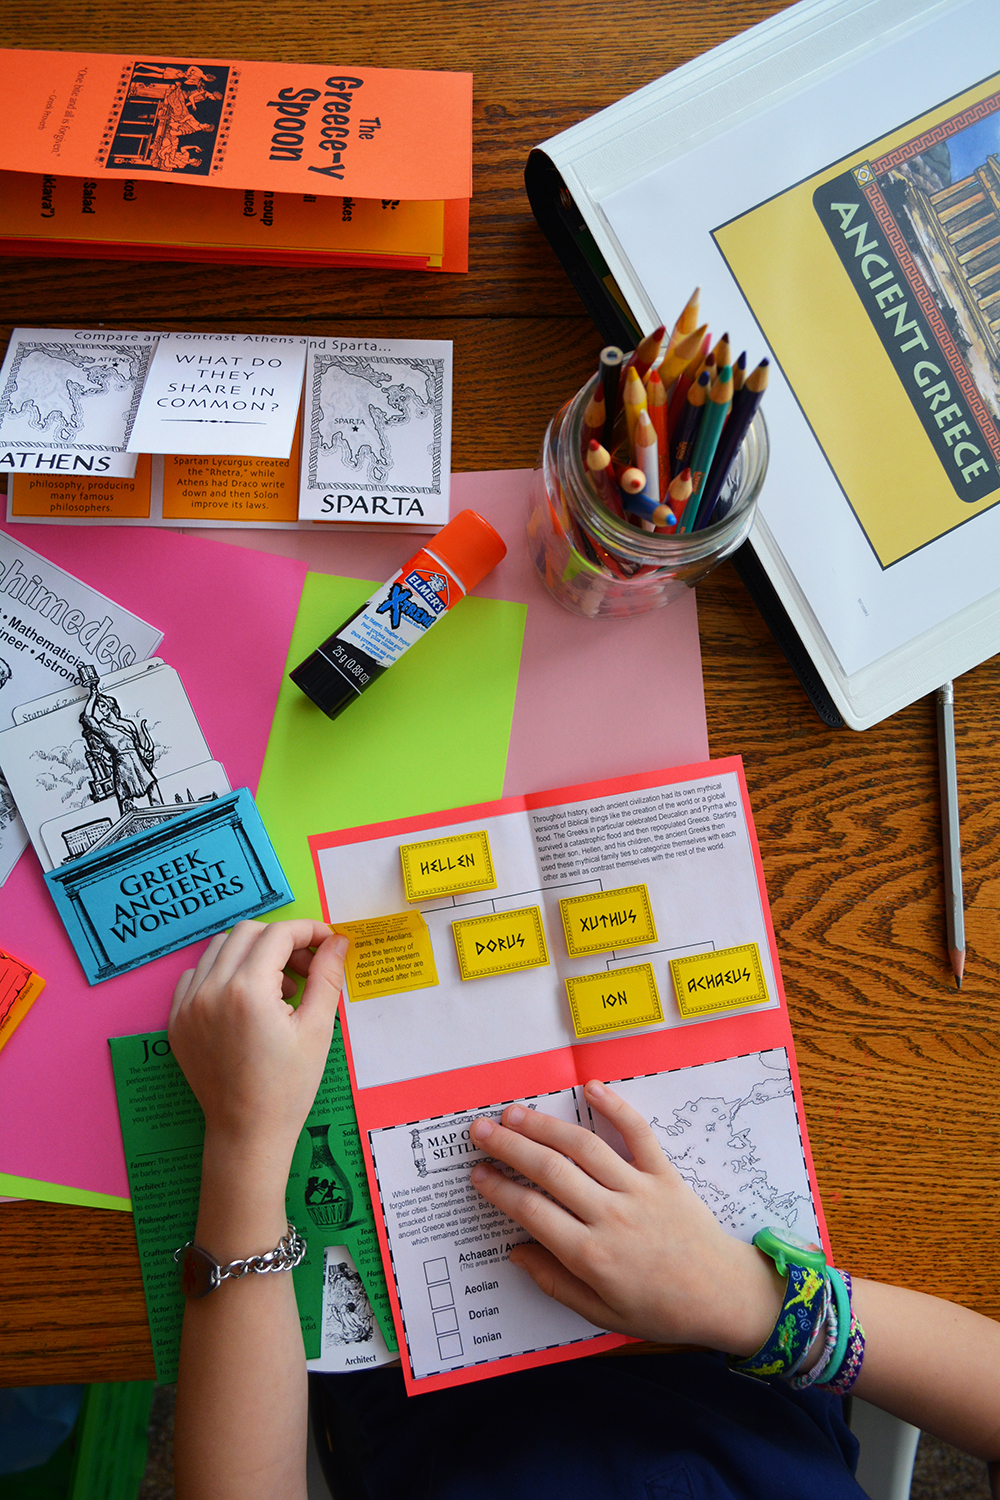 Project Passport Review: Hands-on World History Curriculum from Home School in the Woods